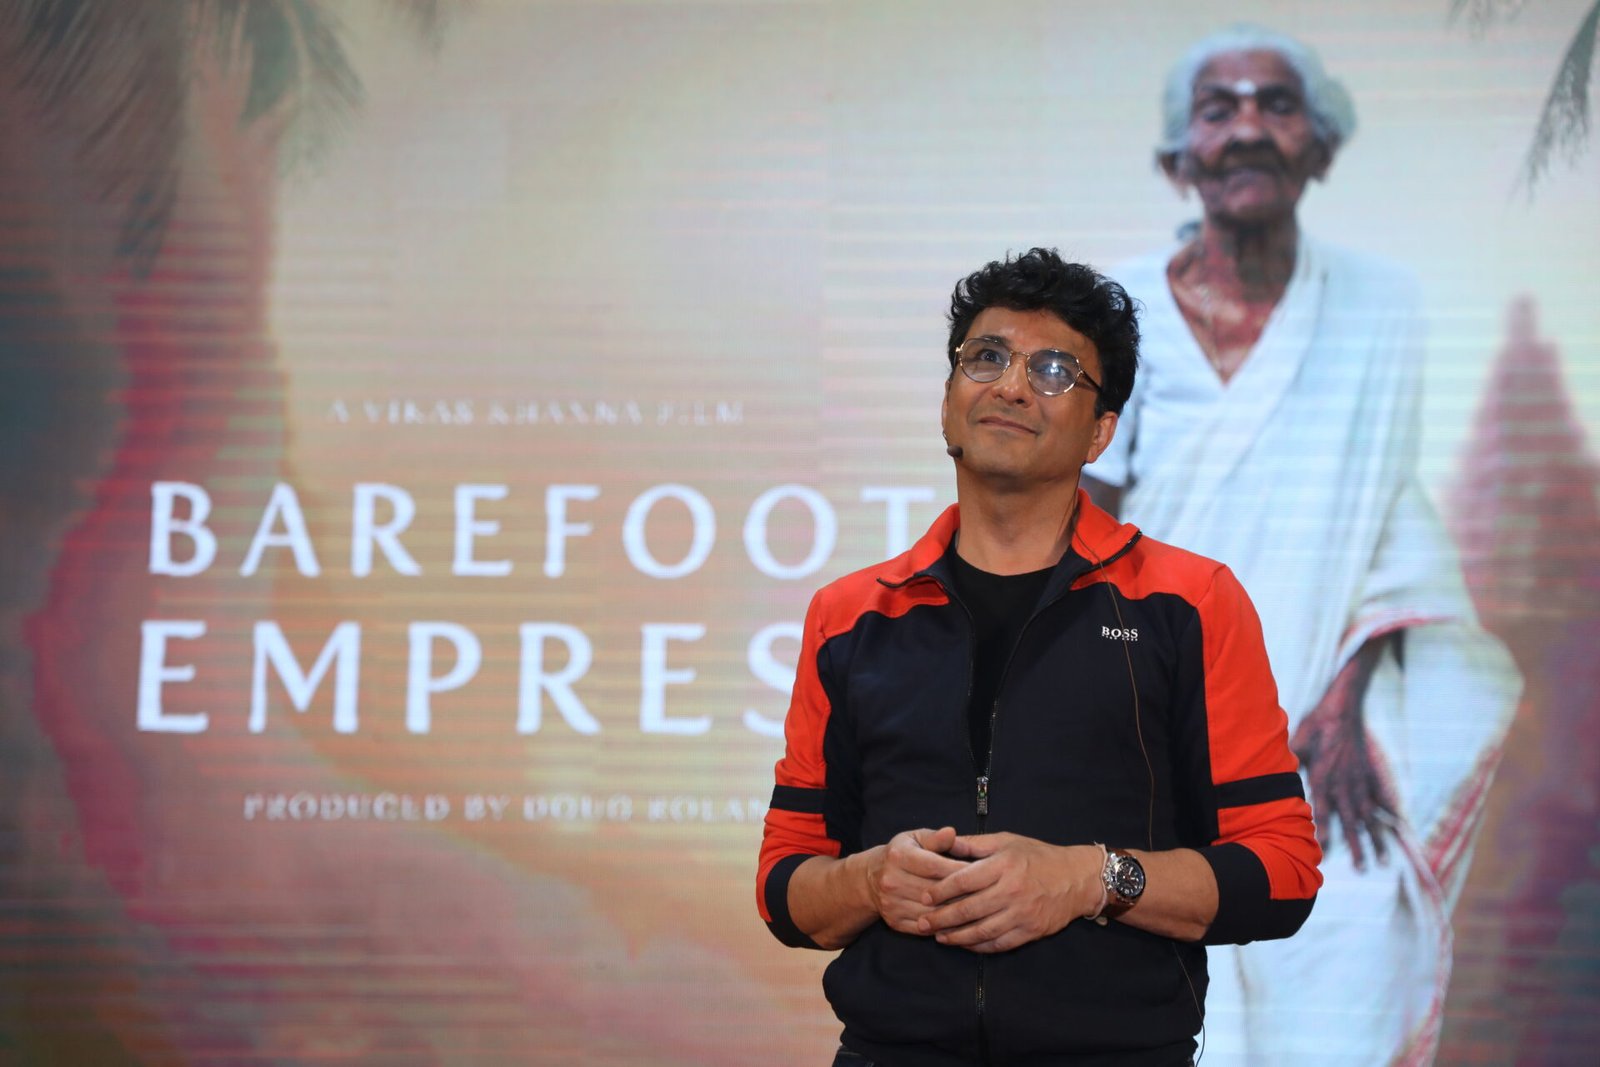 You are currently viewing Vikas Khanna unveils the poster of his upcoming documentary Barefoot Empress based on the legendary Karthyayani Amma’s remarkable journey